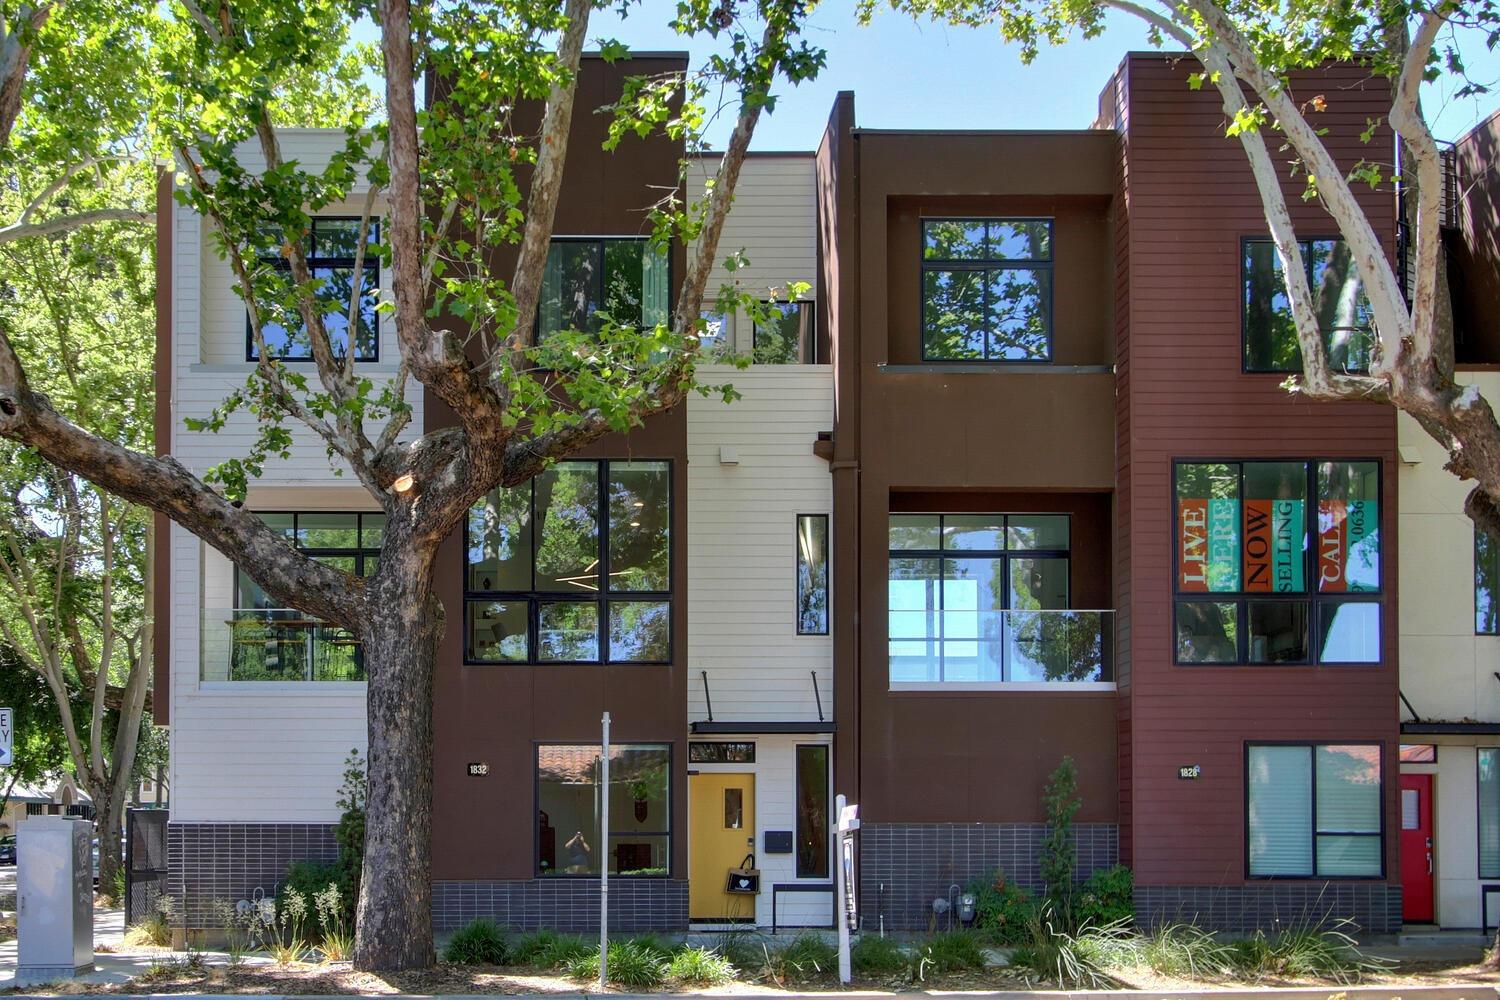 NO HOA FEES! 2020 single family townhouse in a prime downtown location at 5th & S Street. LUXE LIVING at its best featuring a "Treehouse" effect with walls of windows with views of Sacramento's beautiful tree lined streets. Stunning upscale on-trend finishes include a chef's kitchen with white granite waterfall counters and breakfast bar, gas range, stainless steel refrigerator, dishwasher and large walk-in pantry. The great room open concept floor plan has soaring ceilings and a private patio. Enjoy Abundant storage throughout the home and it's 3 bedrooms including a laundry closet upstairs. The LUXE Master Suite offers soothing treetop views and a spa inspired shower, double sinks and walk-in closet.The first level has direct access to the gated driveway for private access for just the 5 homes in the development for your oversized 1 car garage with an Electric Vehicle charging station.